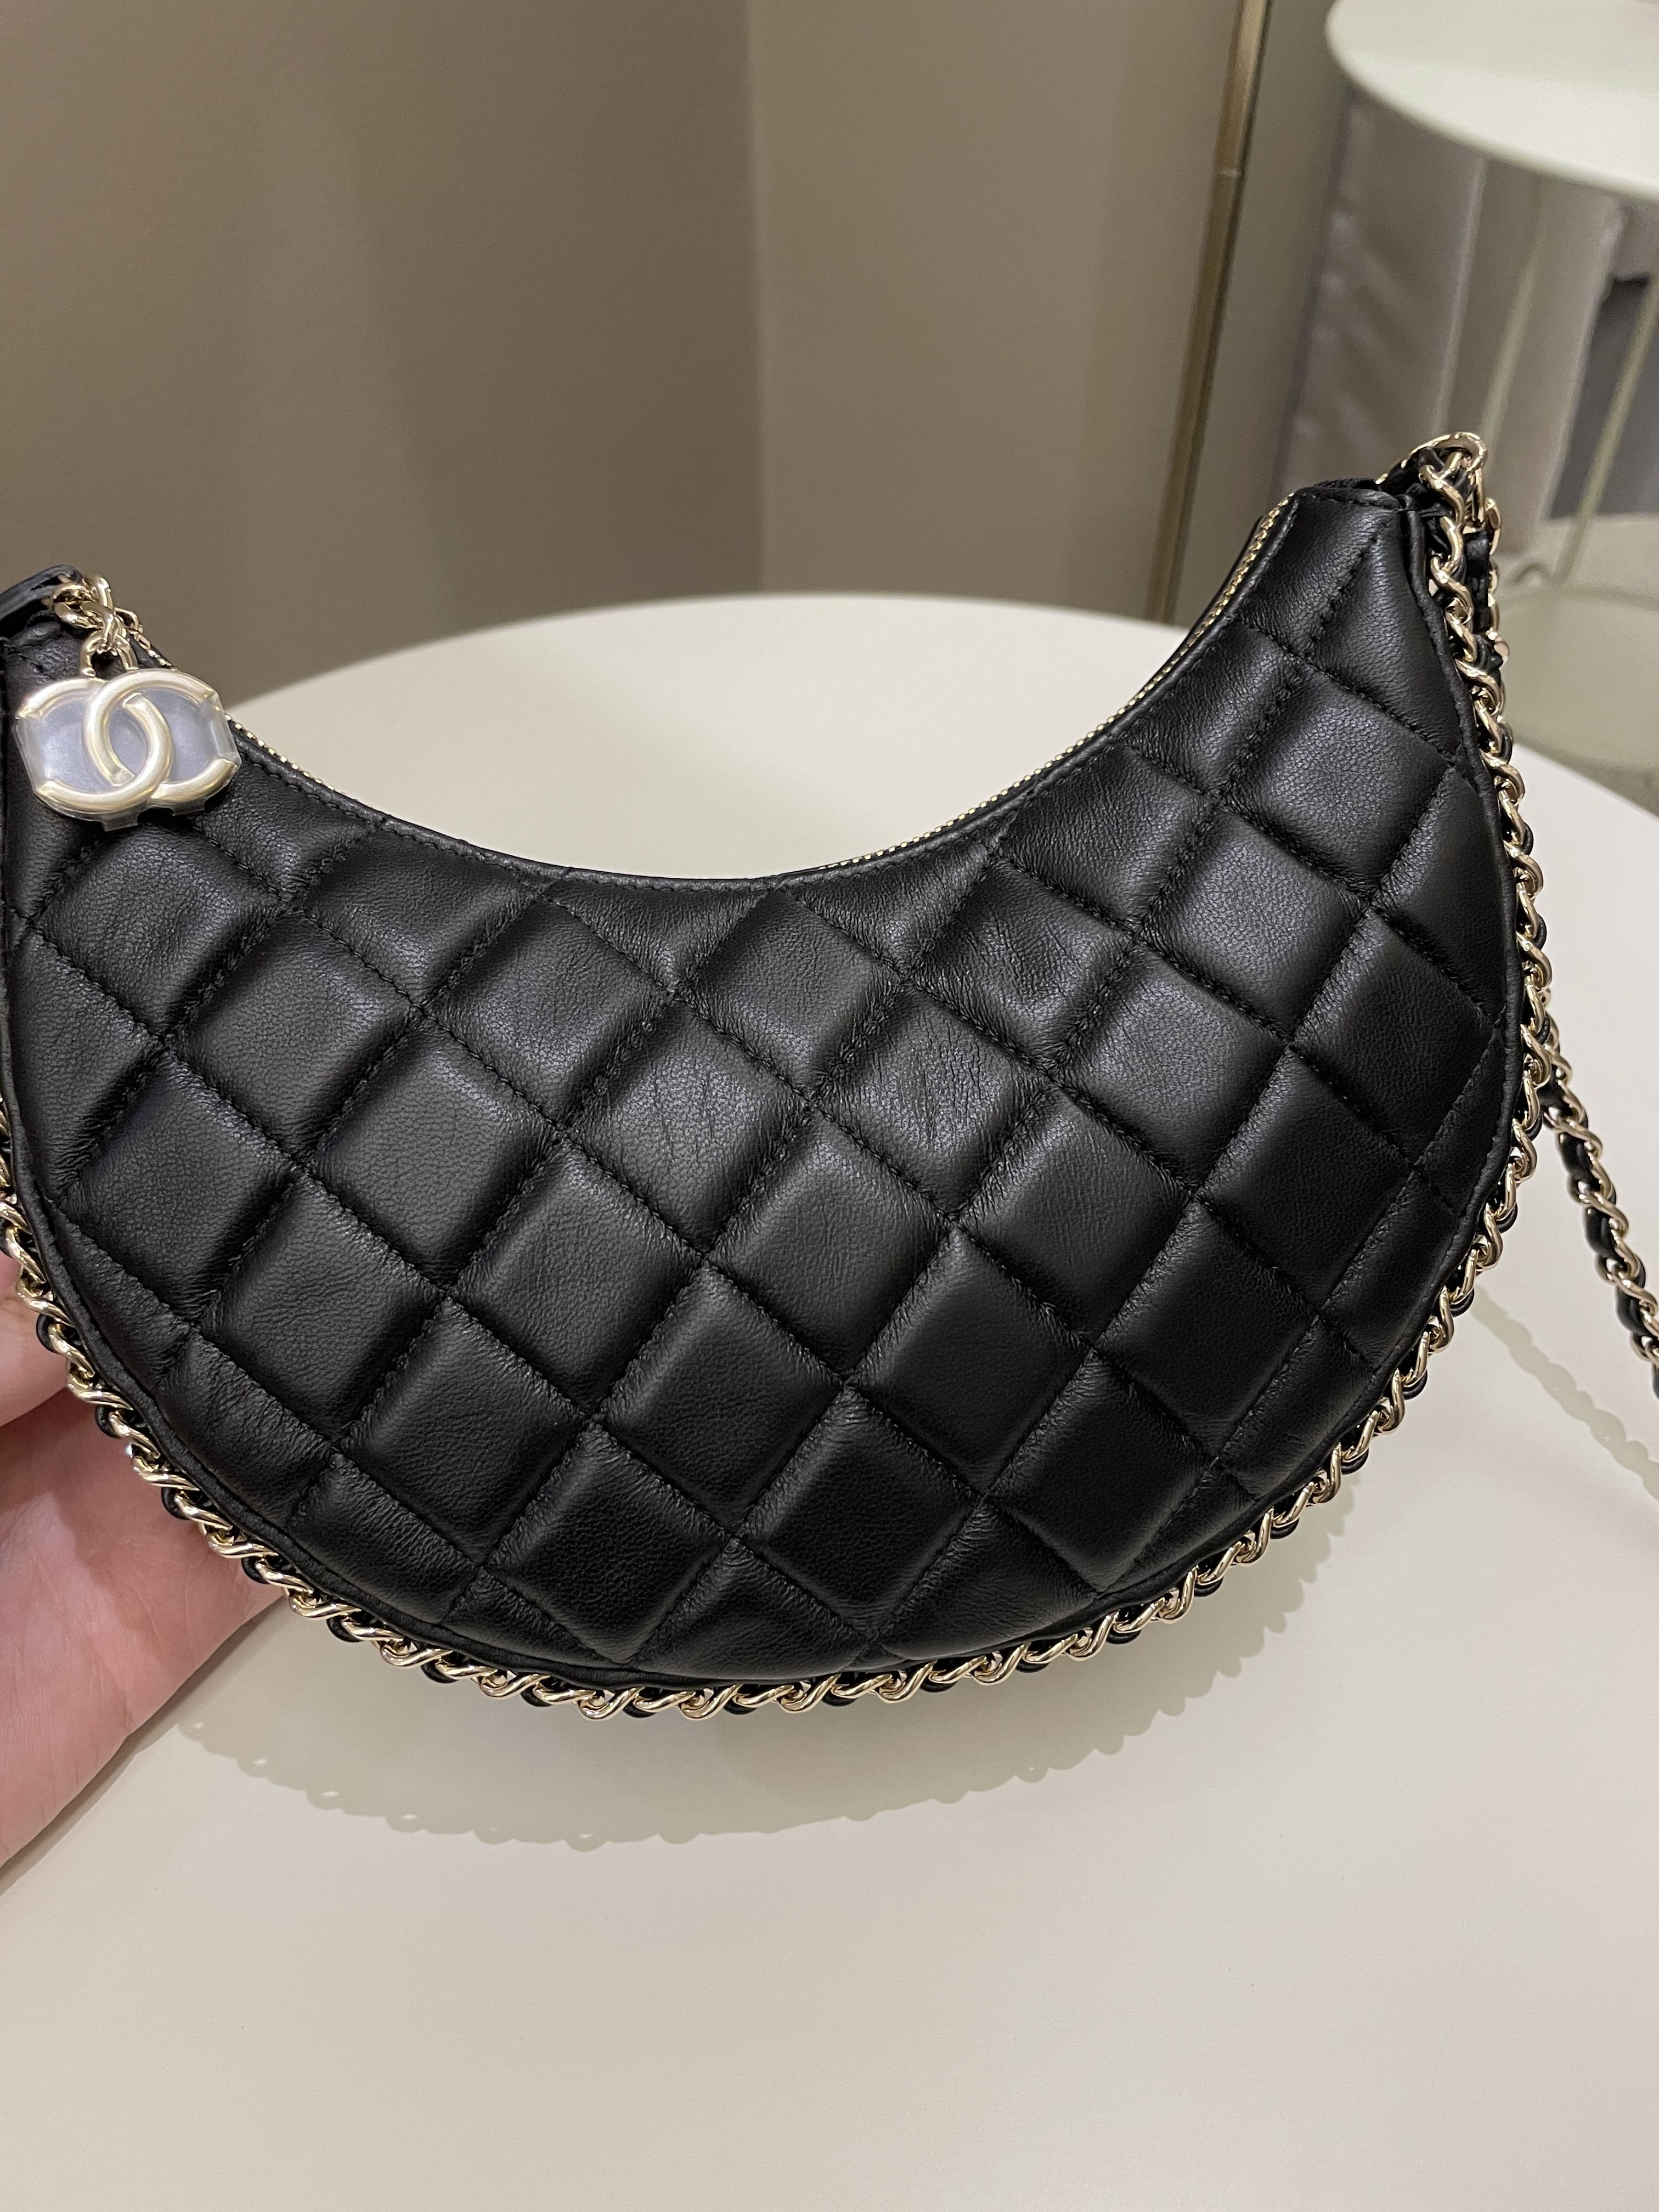 Chanel Lambskin Quilted Small Hobo Bag Black